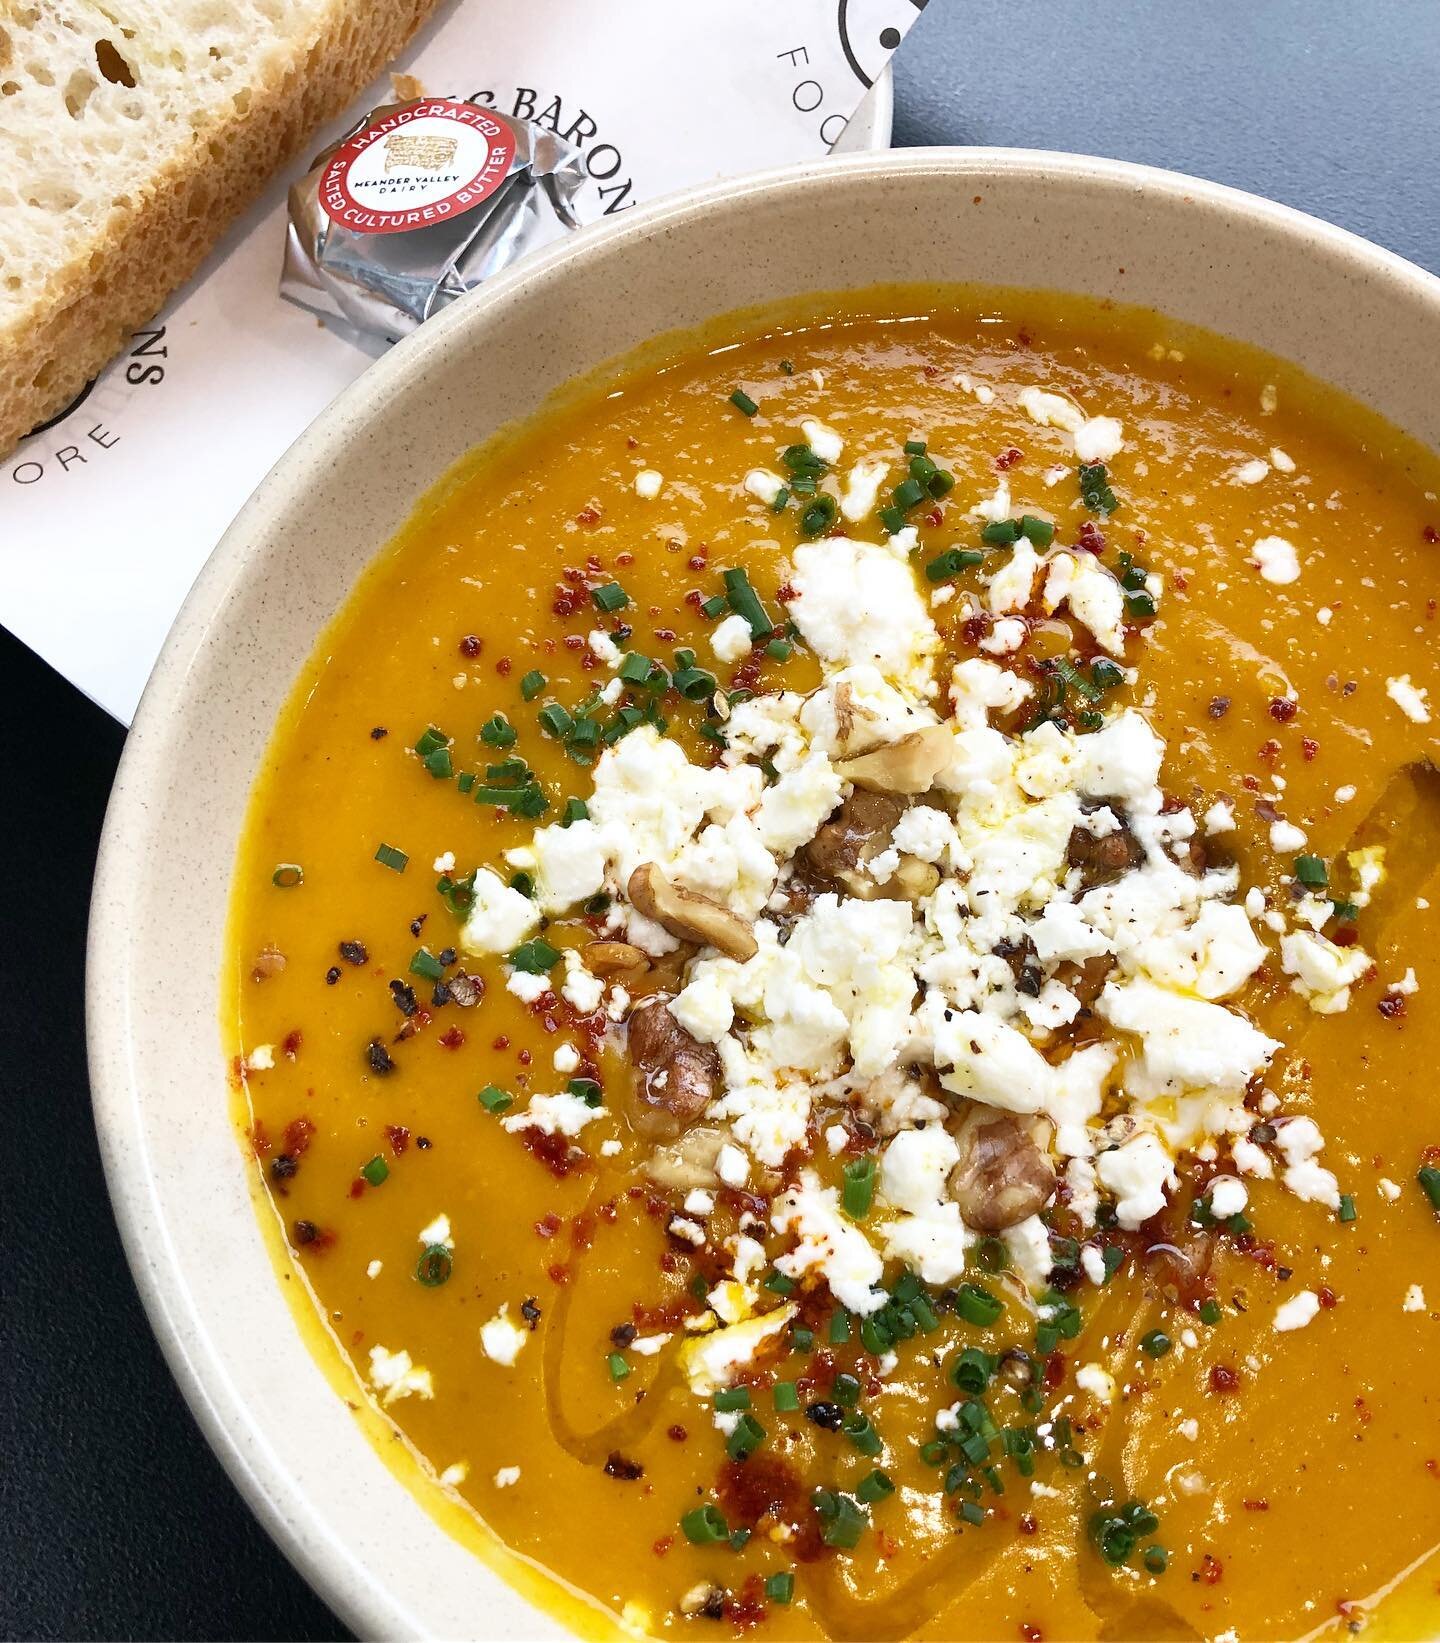 Day for it! ☔️ 

Pumpkin soup, feta, walnut &amp; chives. Served with focaccia!